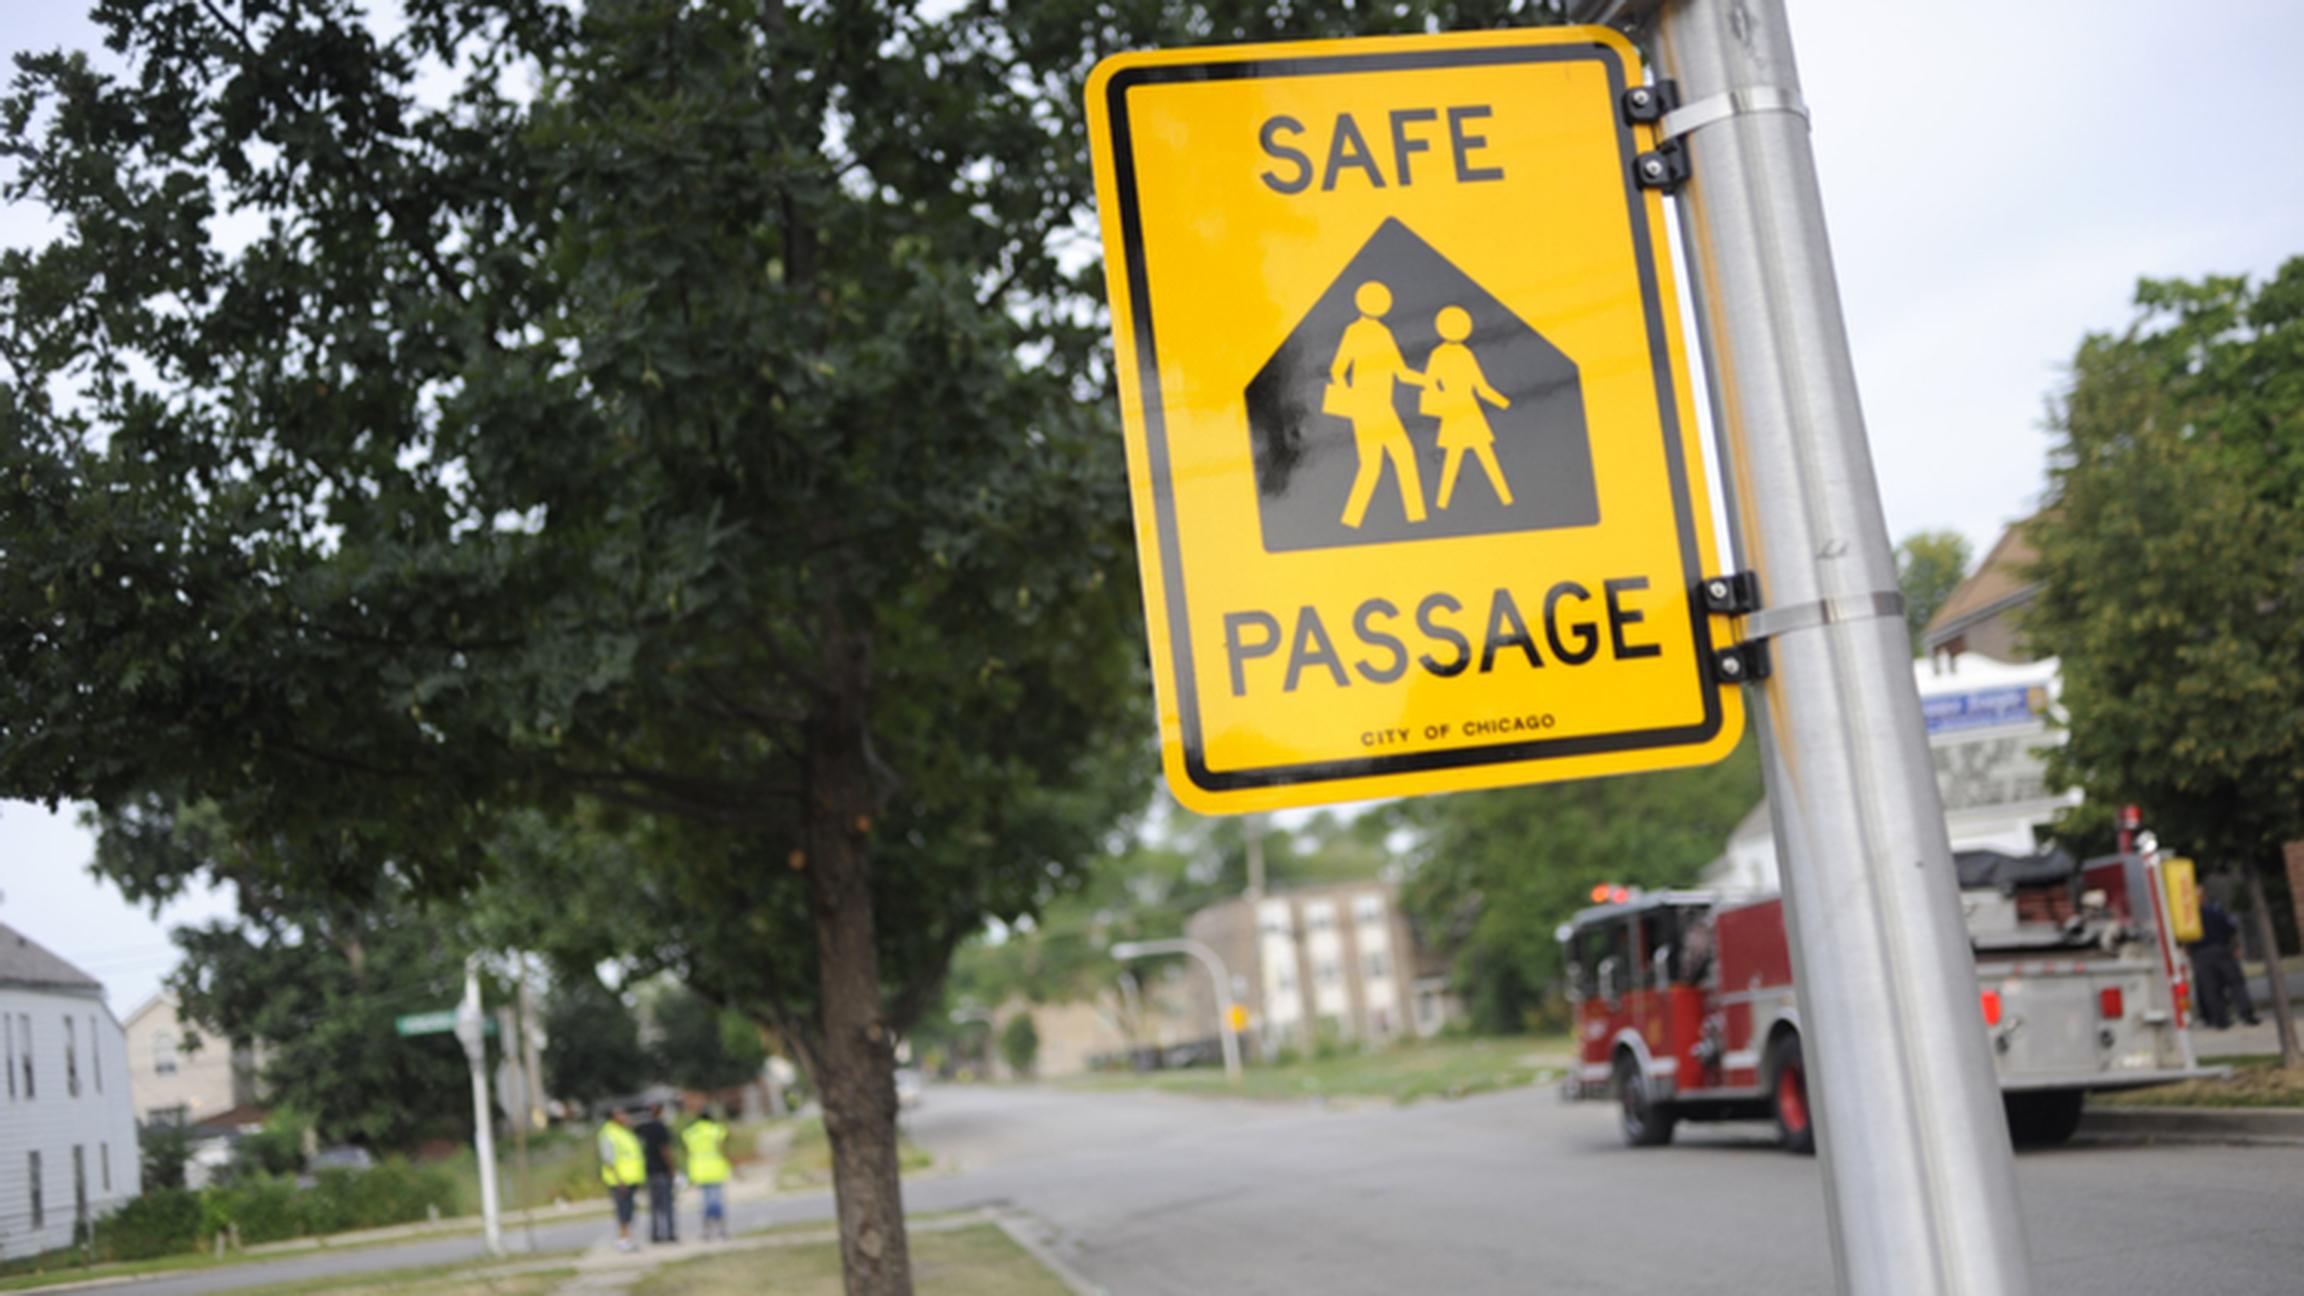 Chicago Public Schools says incidents of crime has fallen by a third along its Safe Passage routes since 2012. (WBEZ / Flickr)